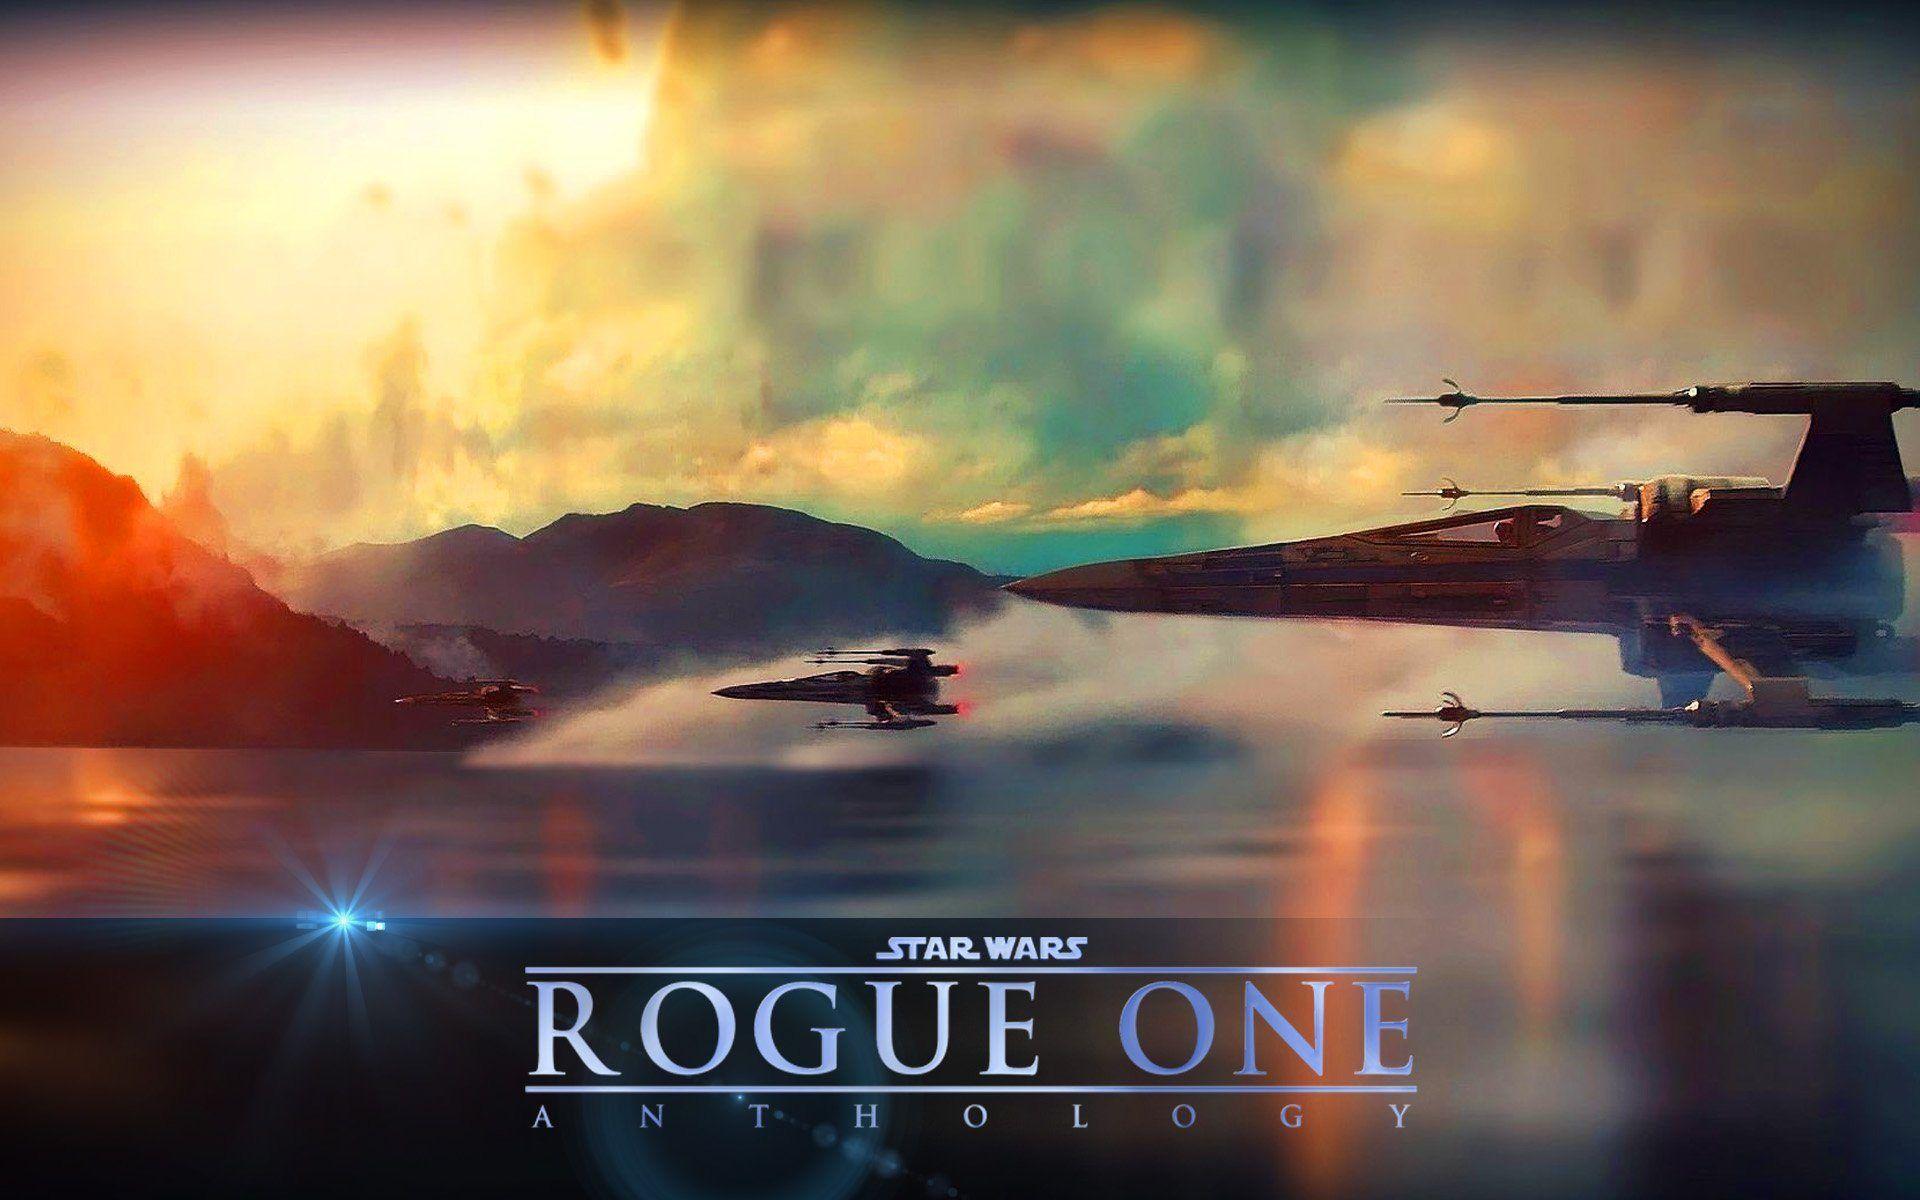 Another STAR WARS Rogue One Wallpaper Scene from Force Awakens